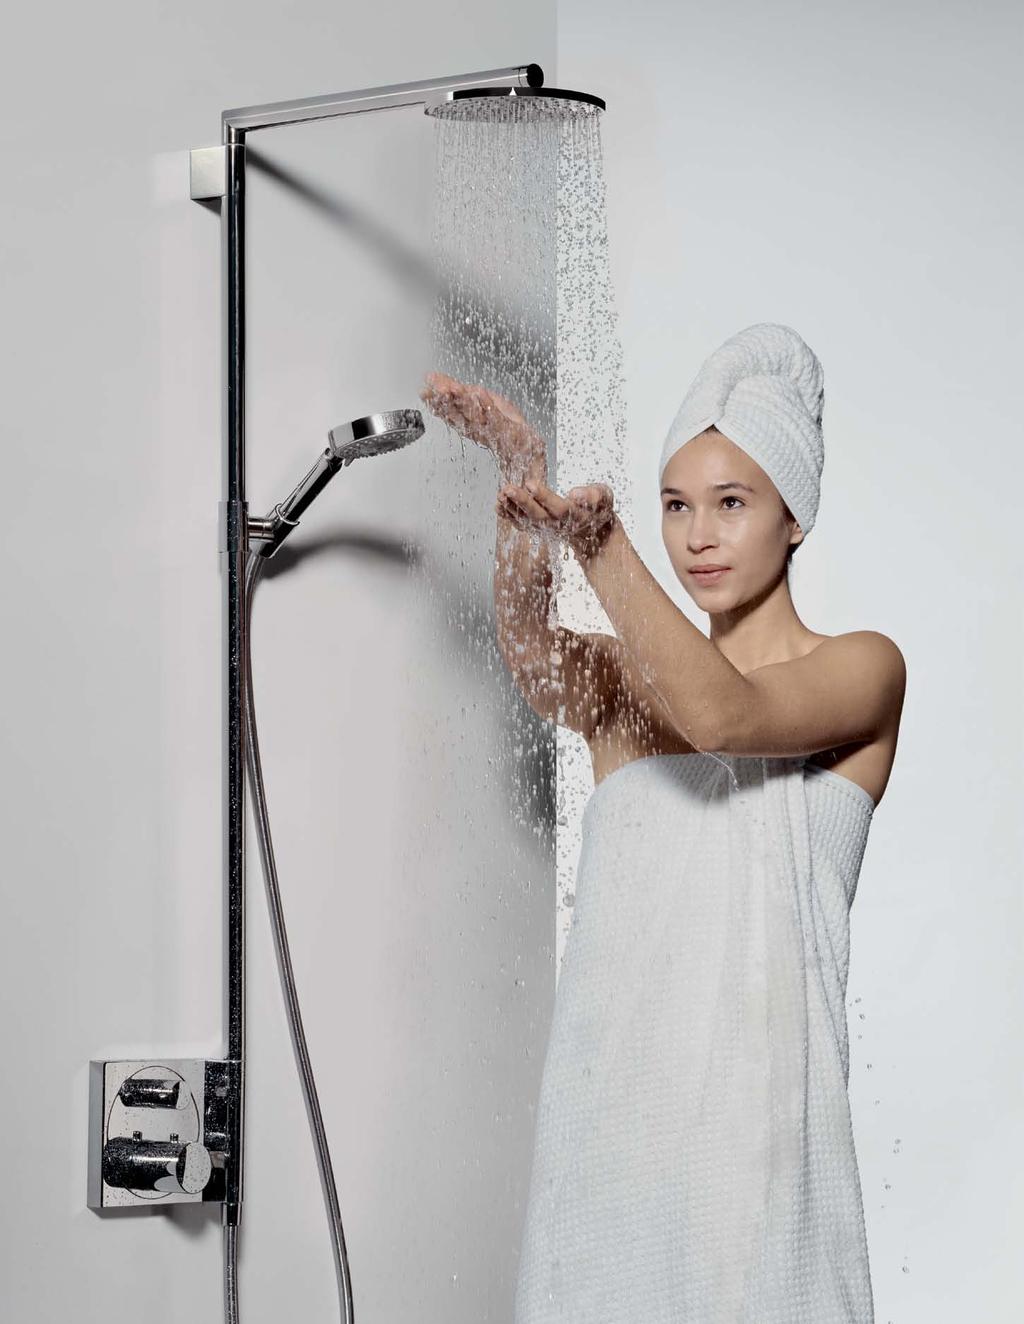 Raindance S Showerpipe. Less is often more. This is especially true for the new Raindance S showerpipe. Its design is both sleek and dynamic. It offers the ultimate in fun and genuine relaxation.